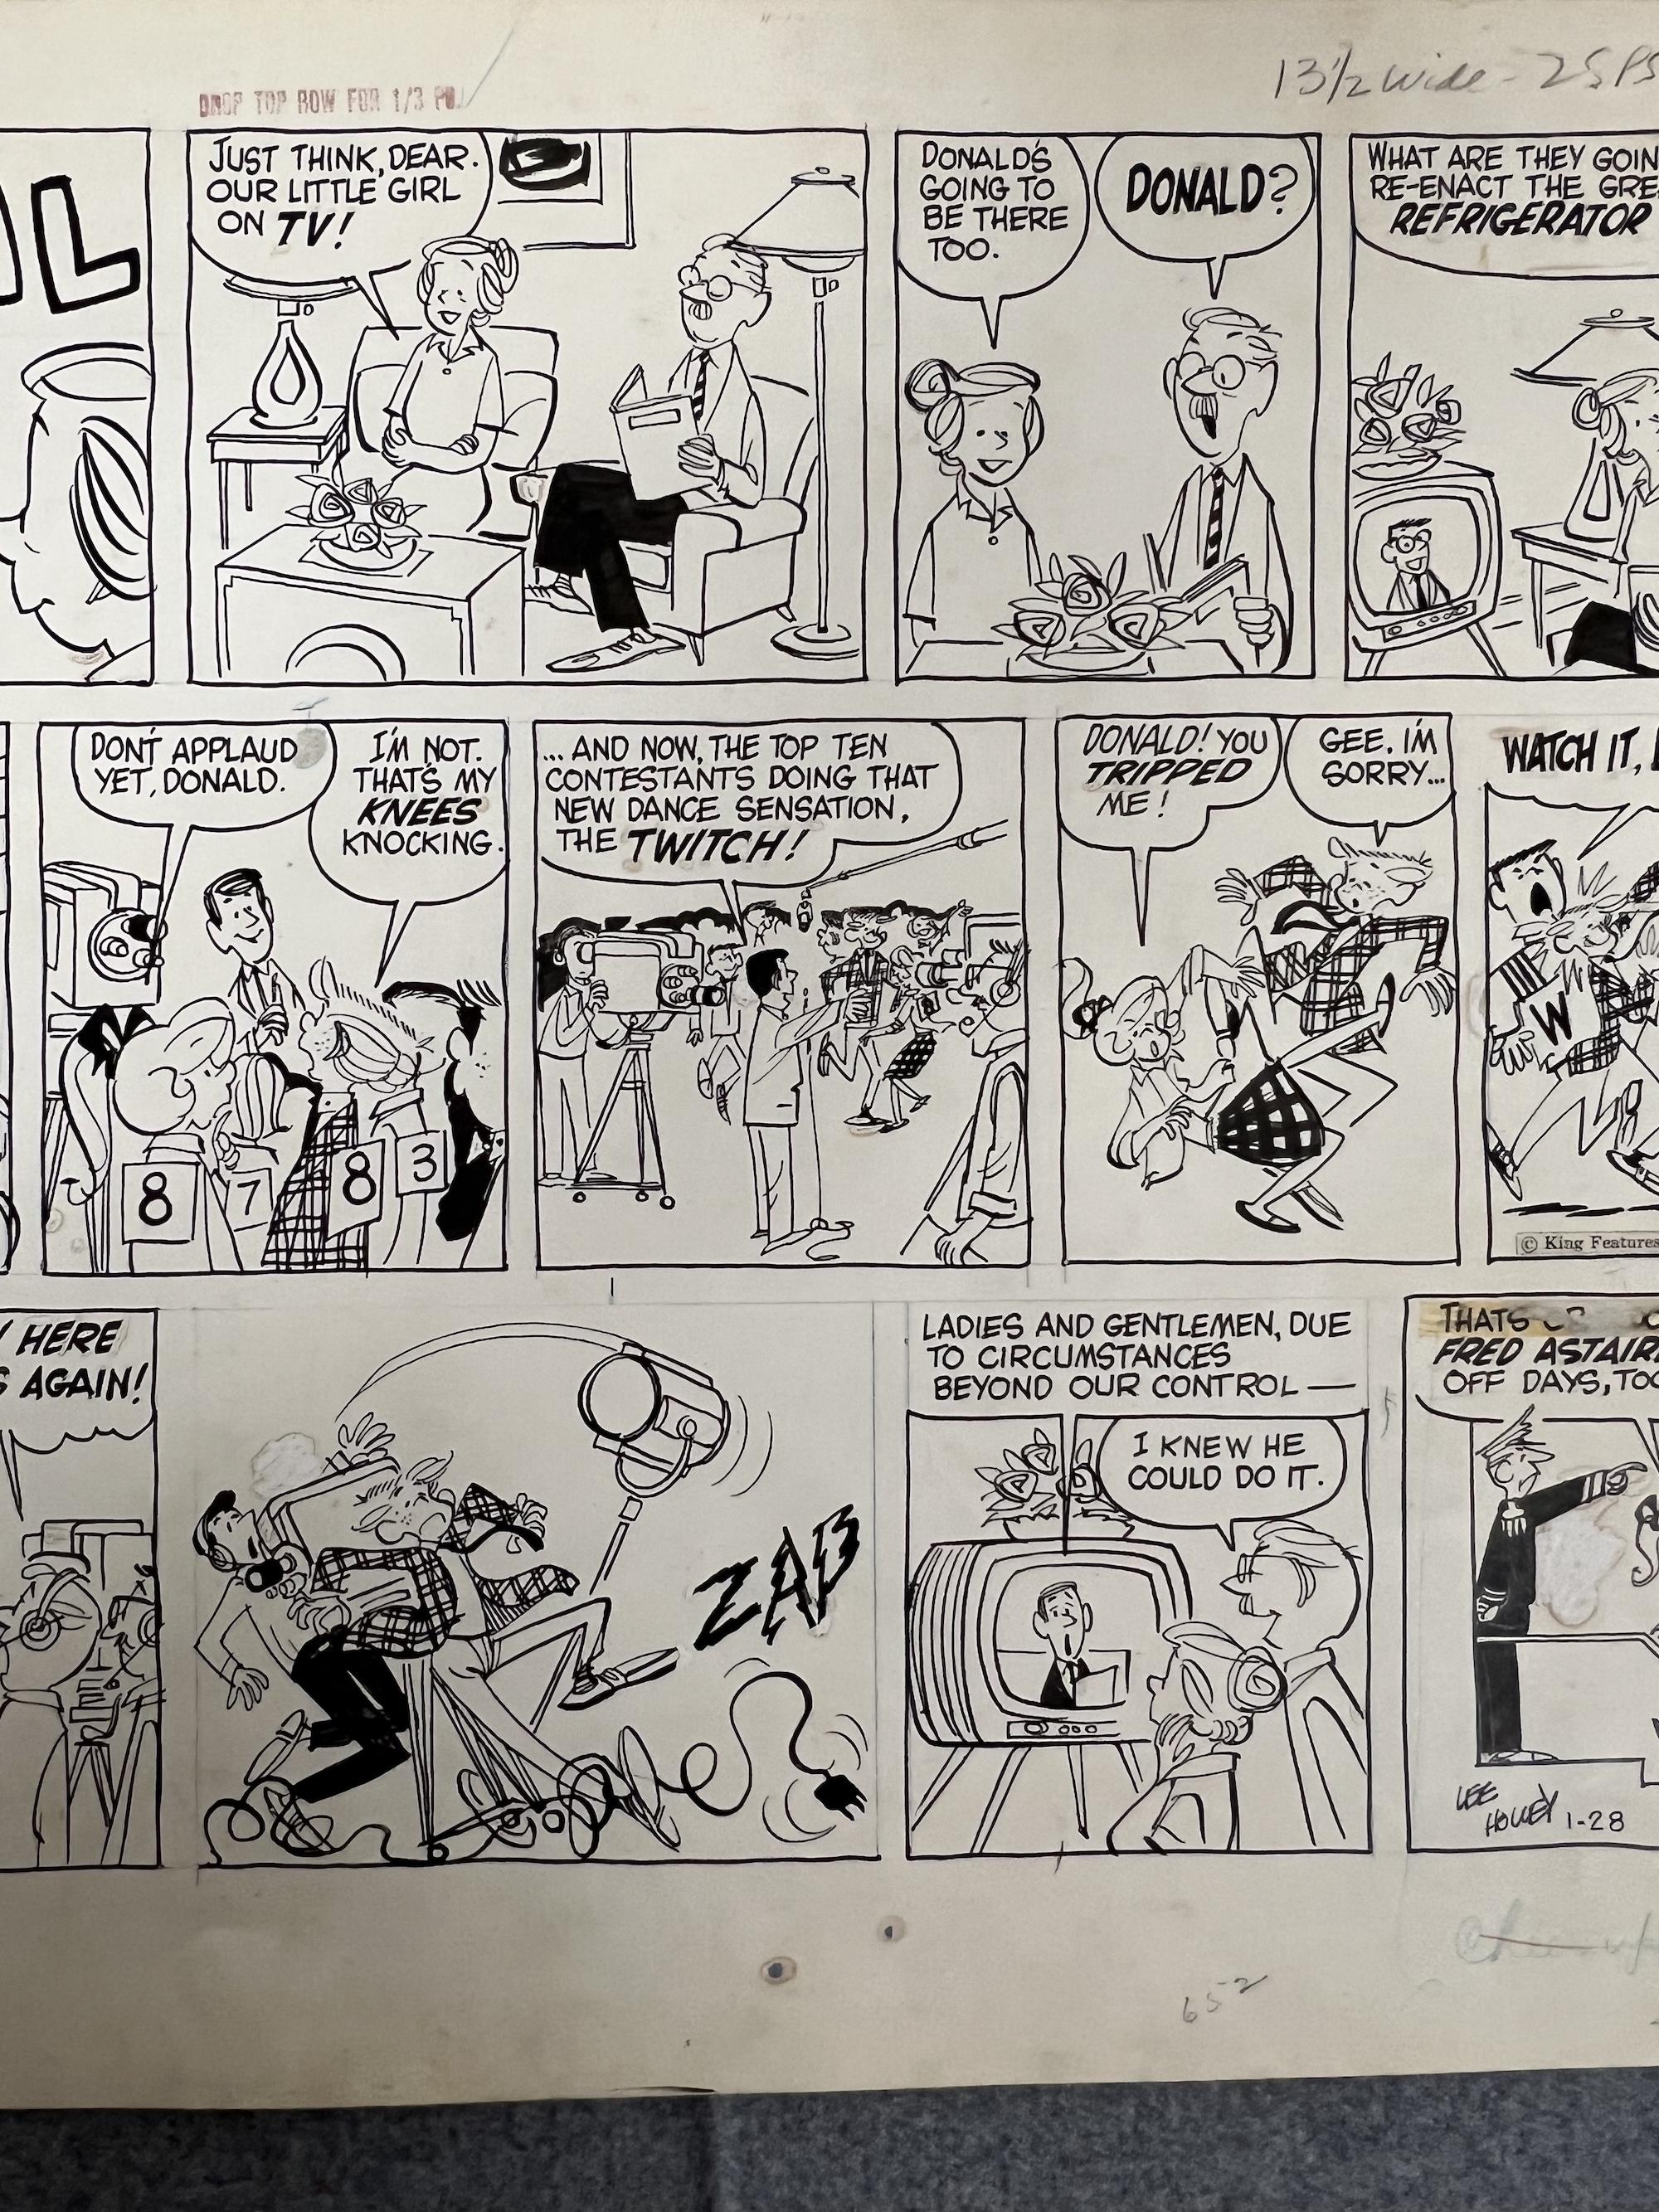 PONY TAIL BY LEE HOLLEY Original Comic Art Storyboard Hand Drawn Art